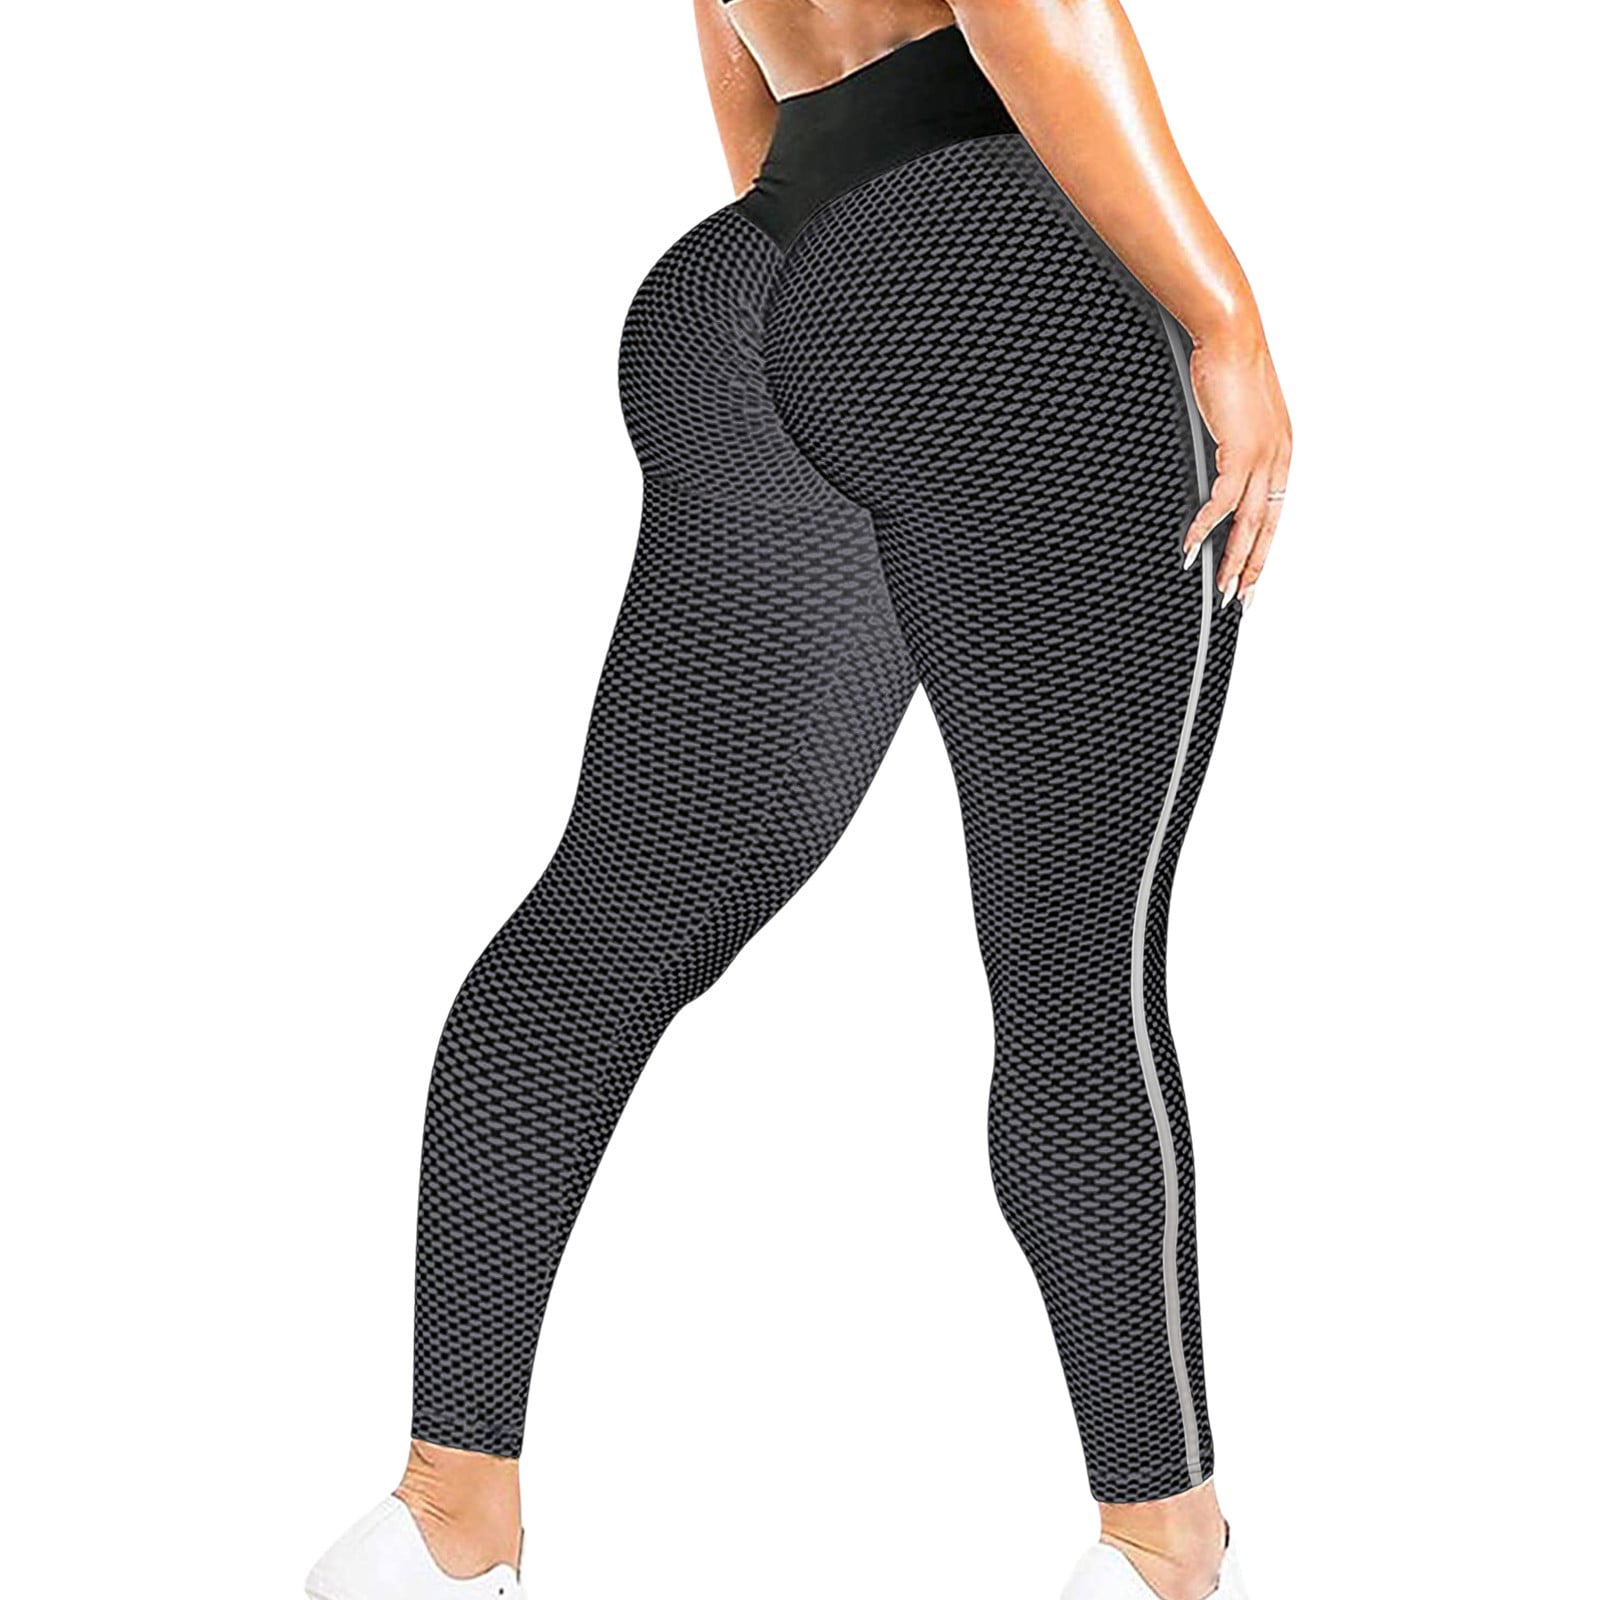 Women US Anti-Cellulite High Waist Yoga Pants Fitness Leggings Sports Gym Ruched 